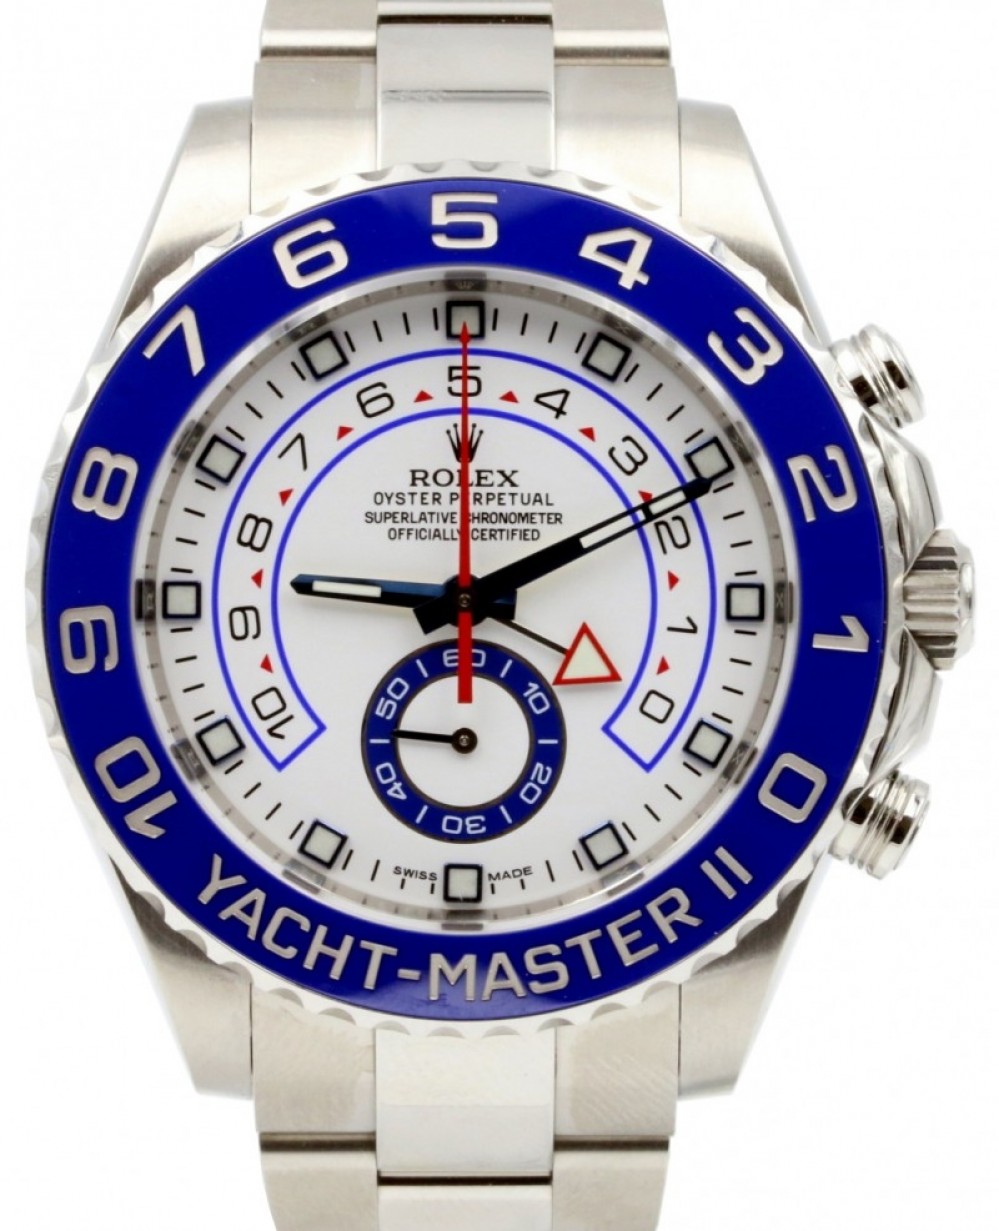 yachtmaster 2 stainless steel price